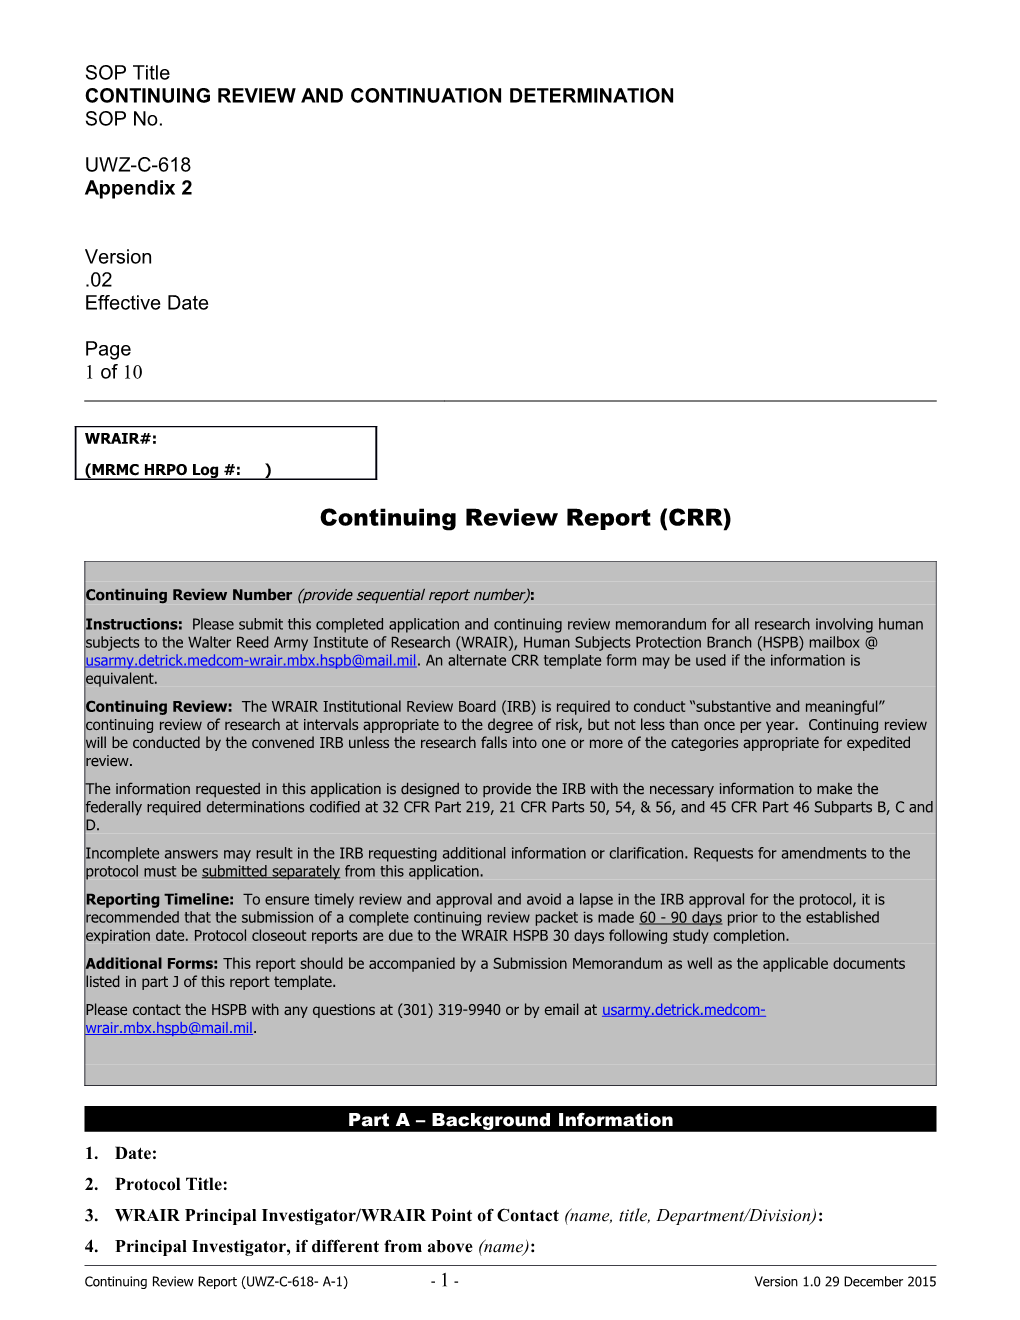 Continuing Review Report (CRR)